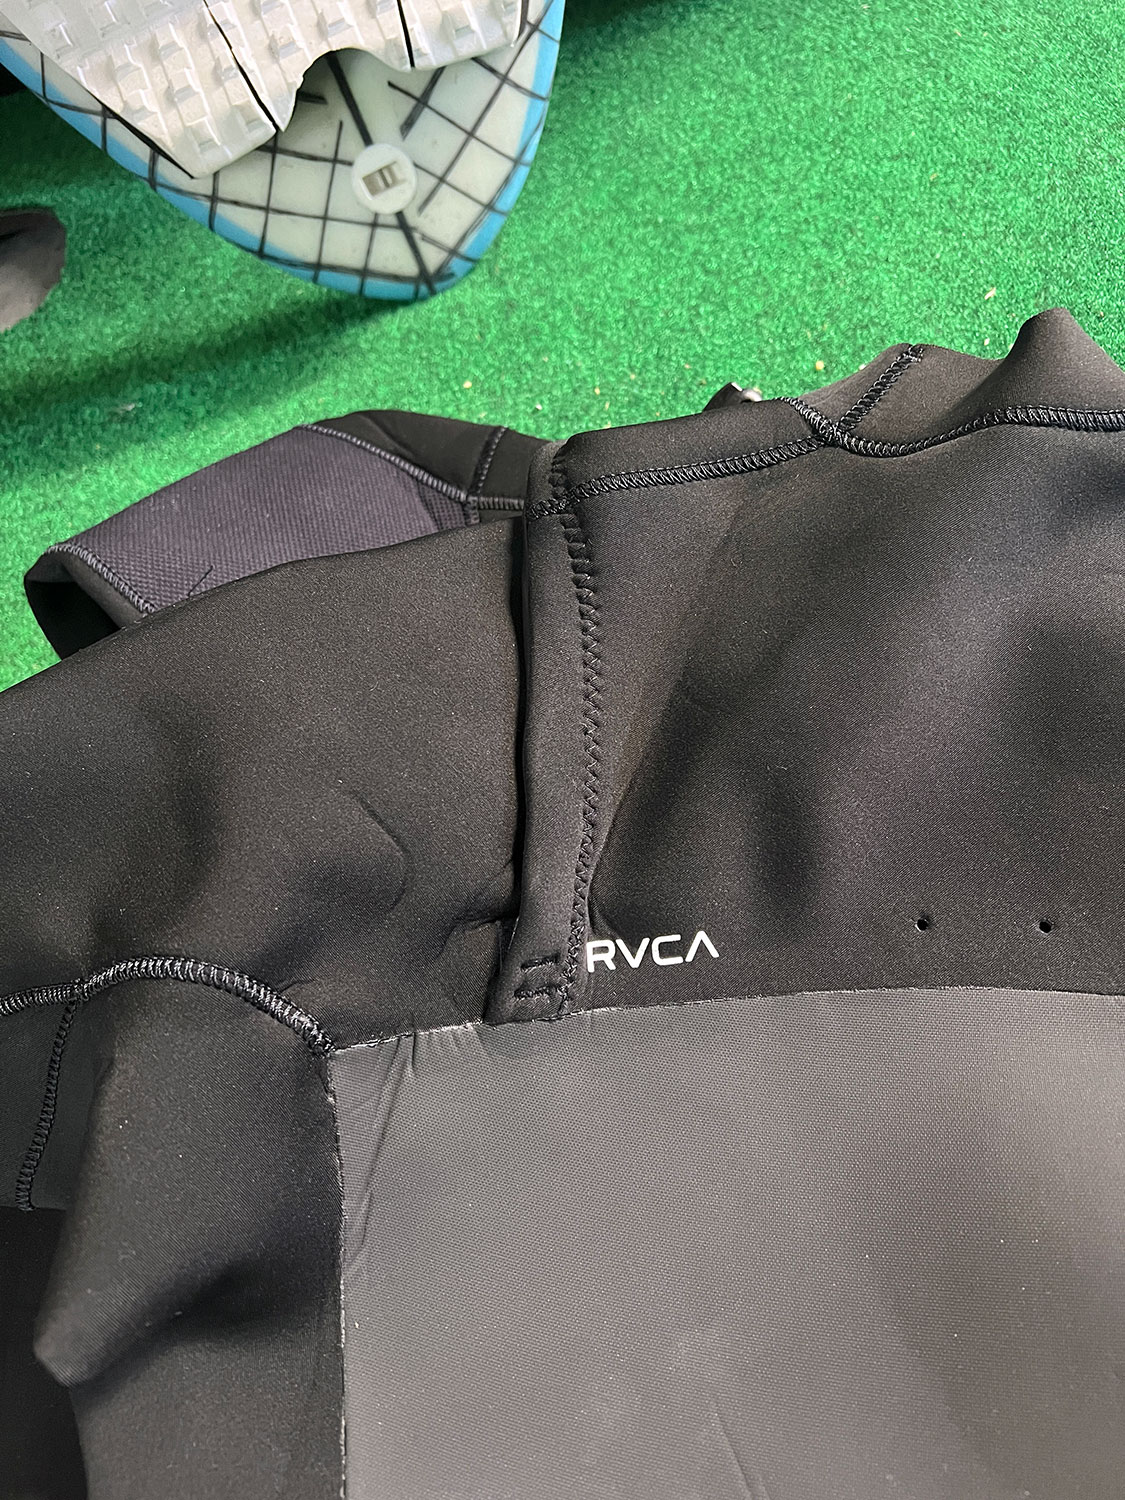 RVCA Balance Wetsuit Review